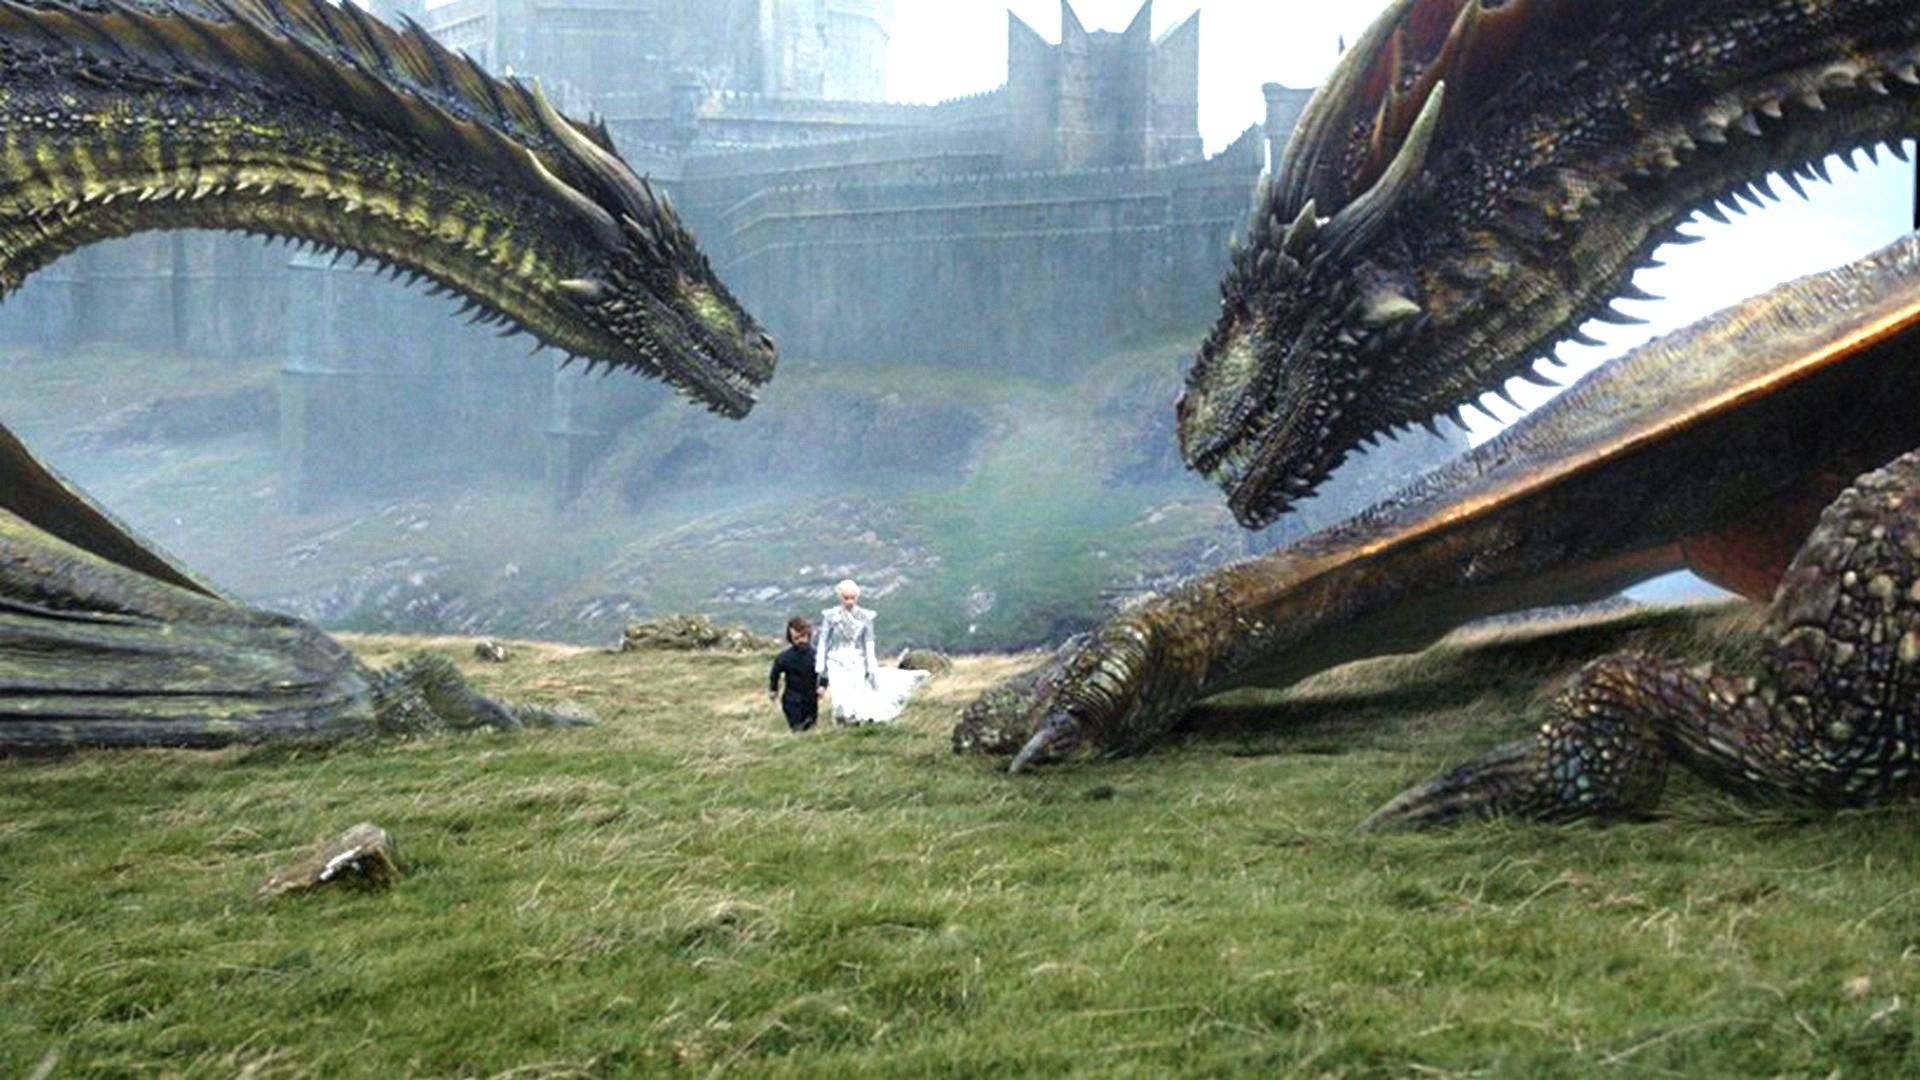 10 Drogon Game Of Thrones HD Wallpapers and Backgrounds